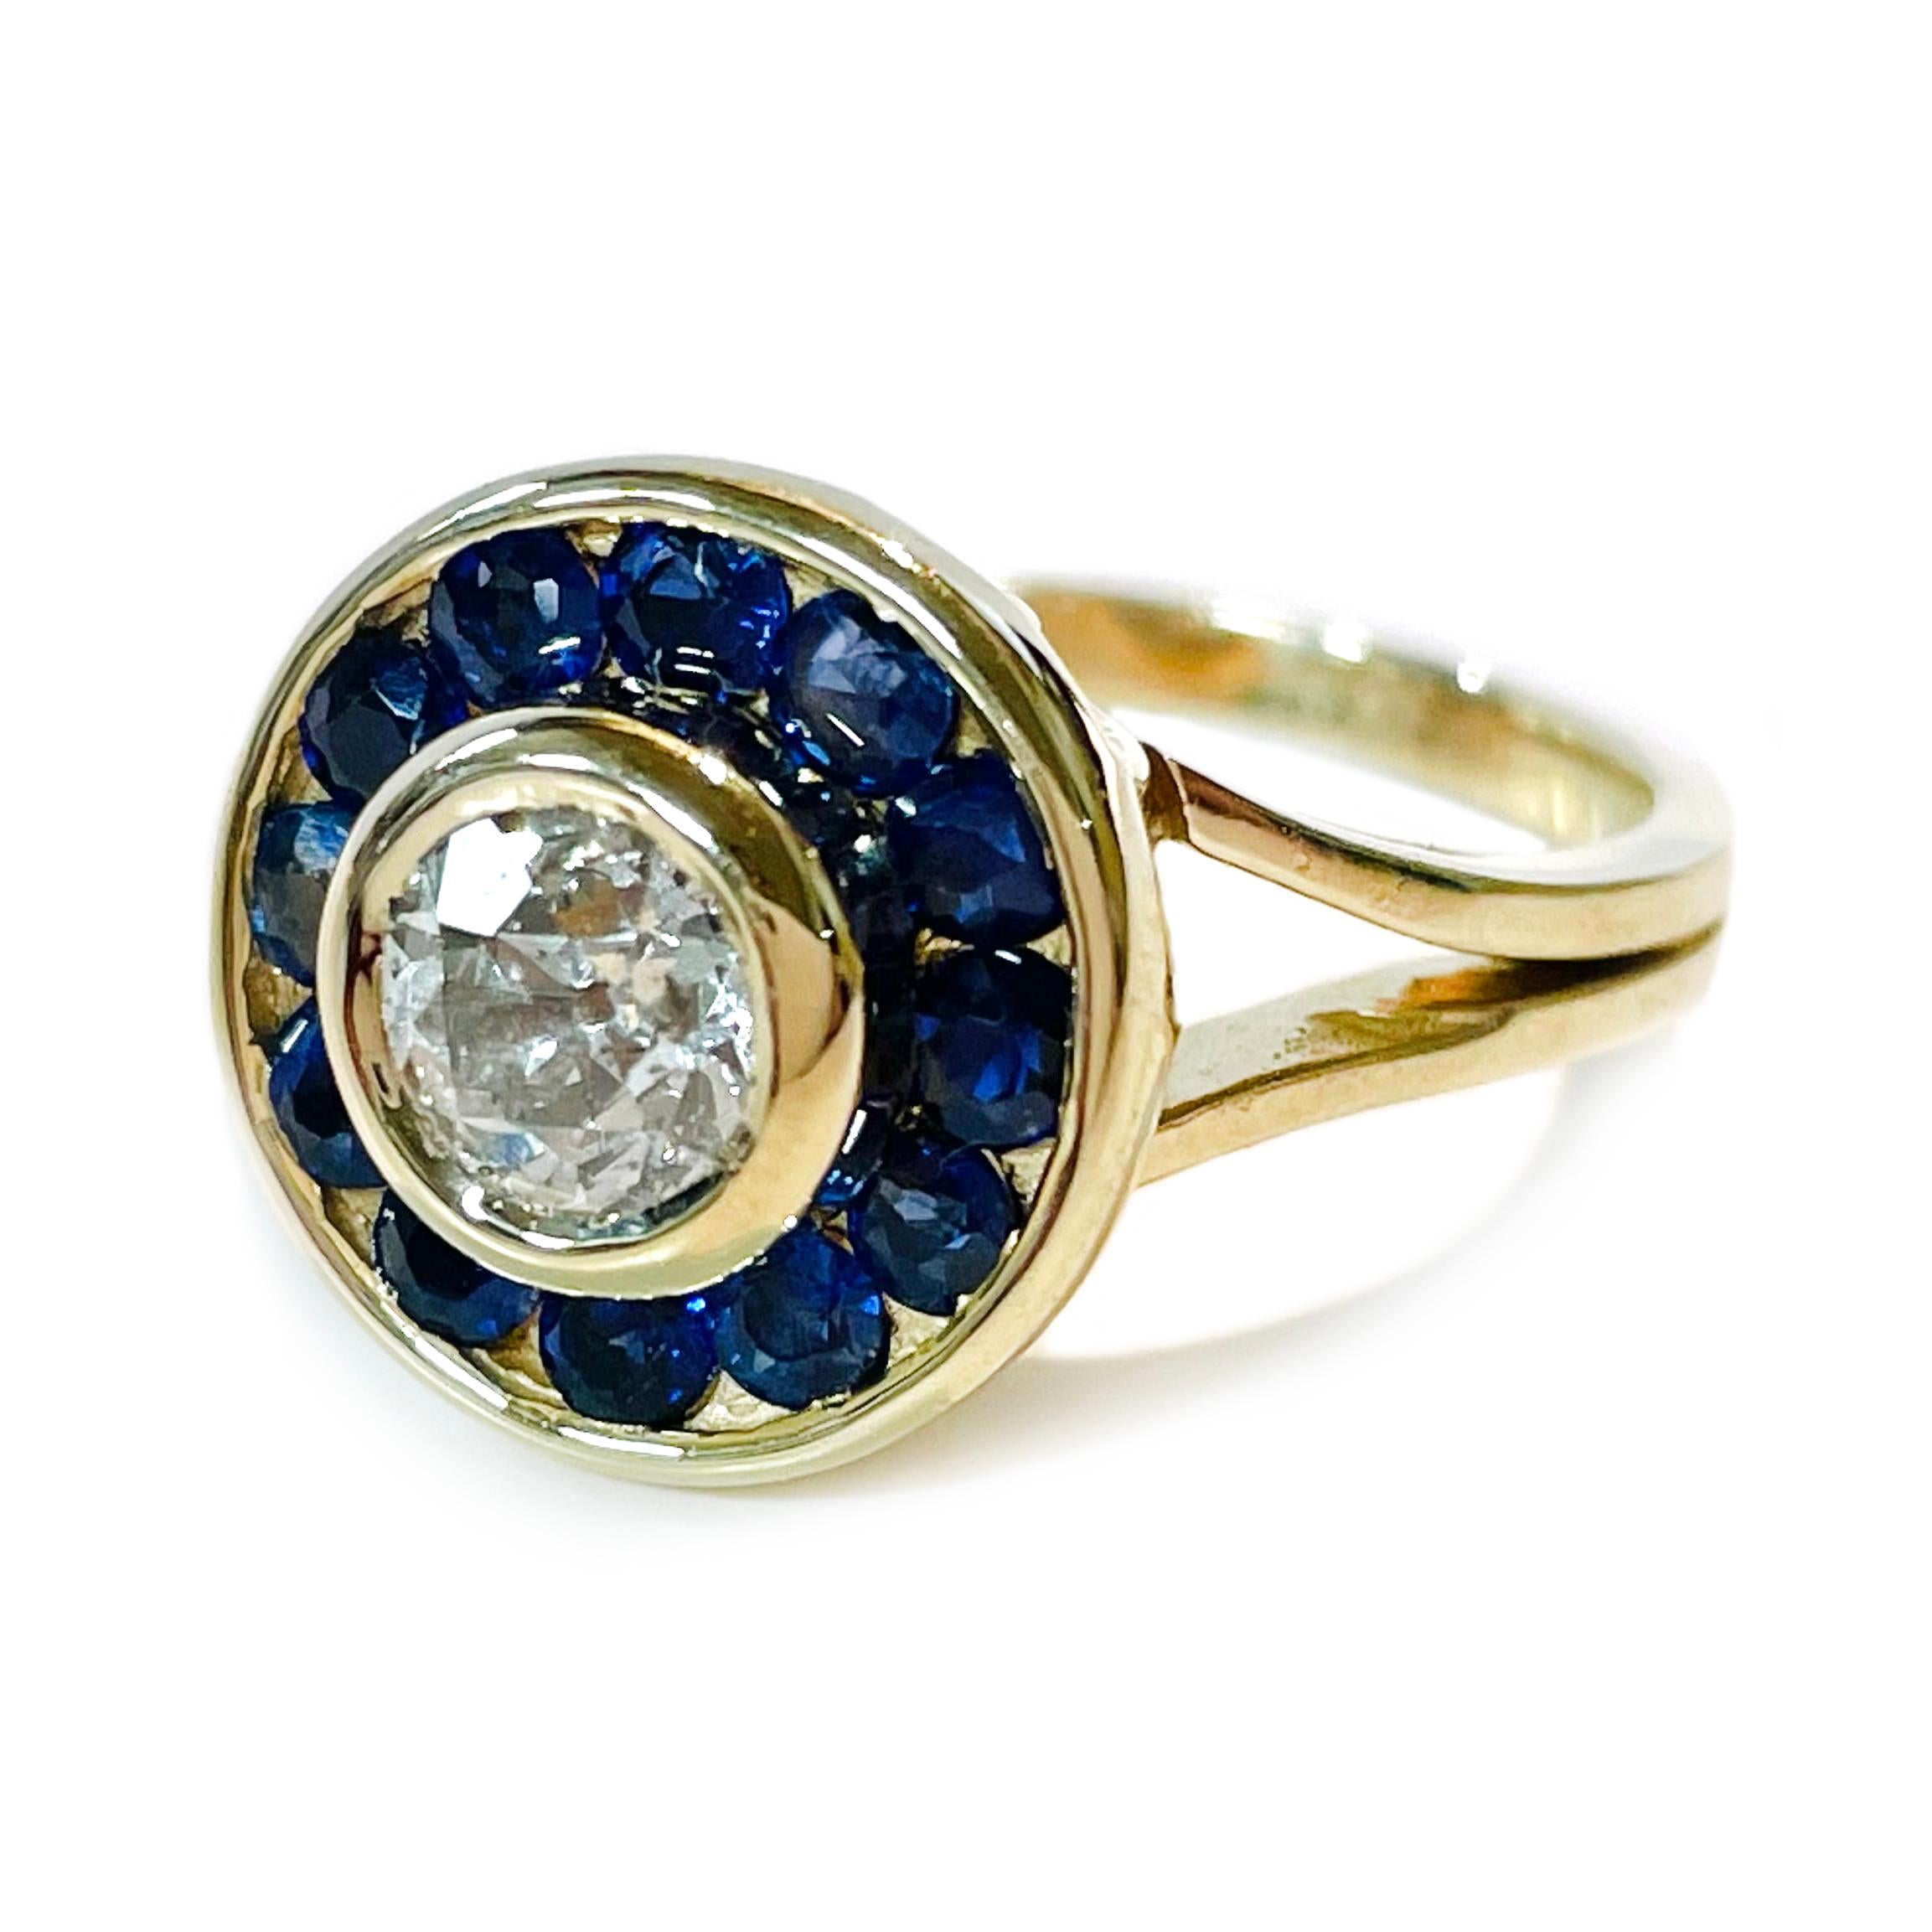 14 Karat Euro-Cut Diamond Blue Sapphire Ring. The ring features a center bezel-set 5.6mm Euro-cut round diamond with a carat weight of 0.65ct and twelve channel-set 3.2mm round blue sapphires with a total carat weight of 0.72ctw. The diamond is